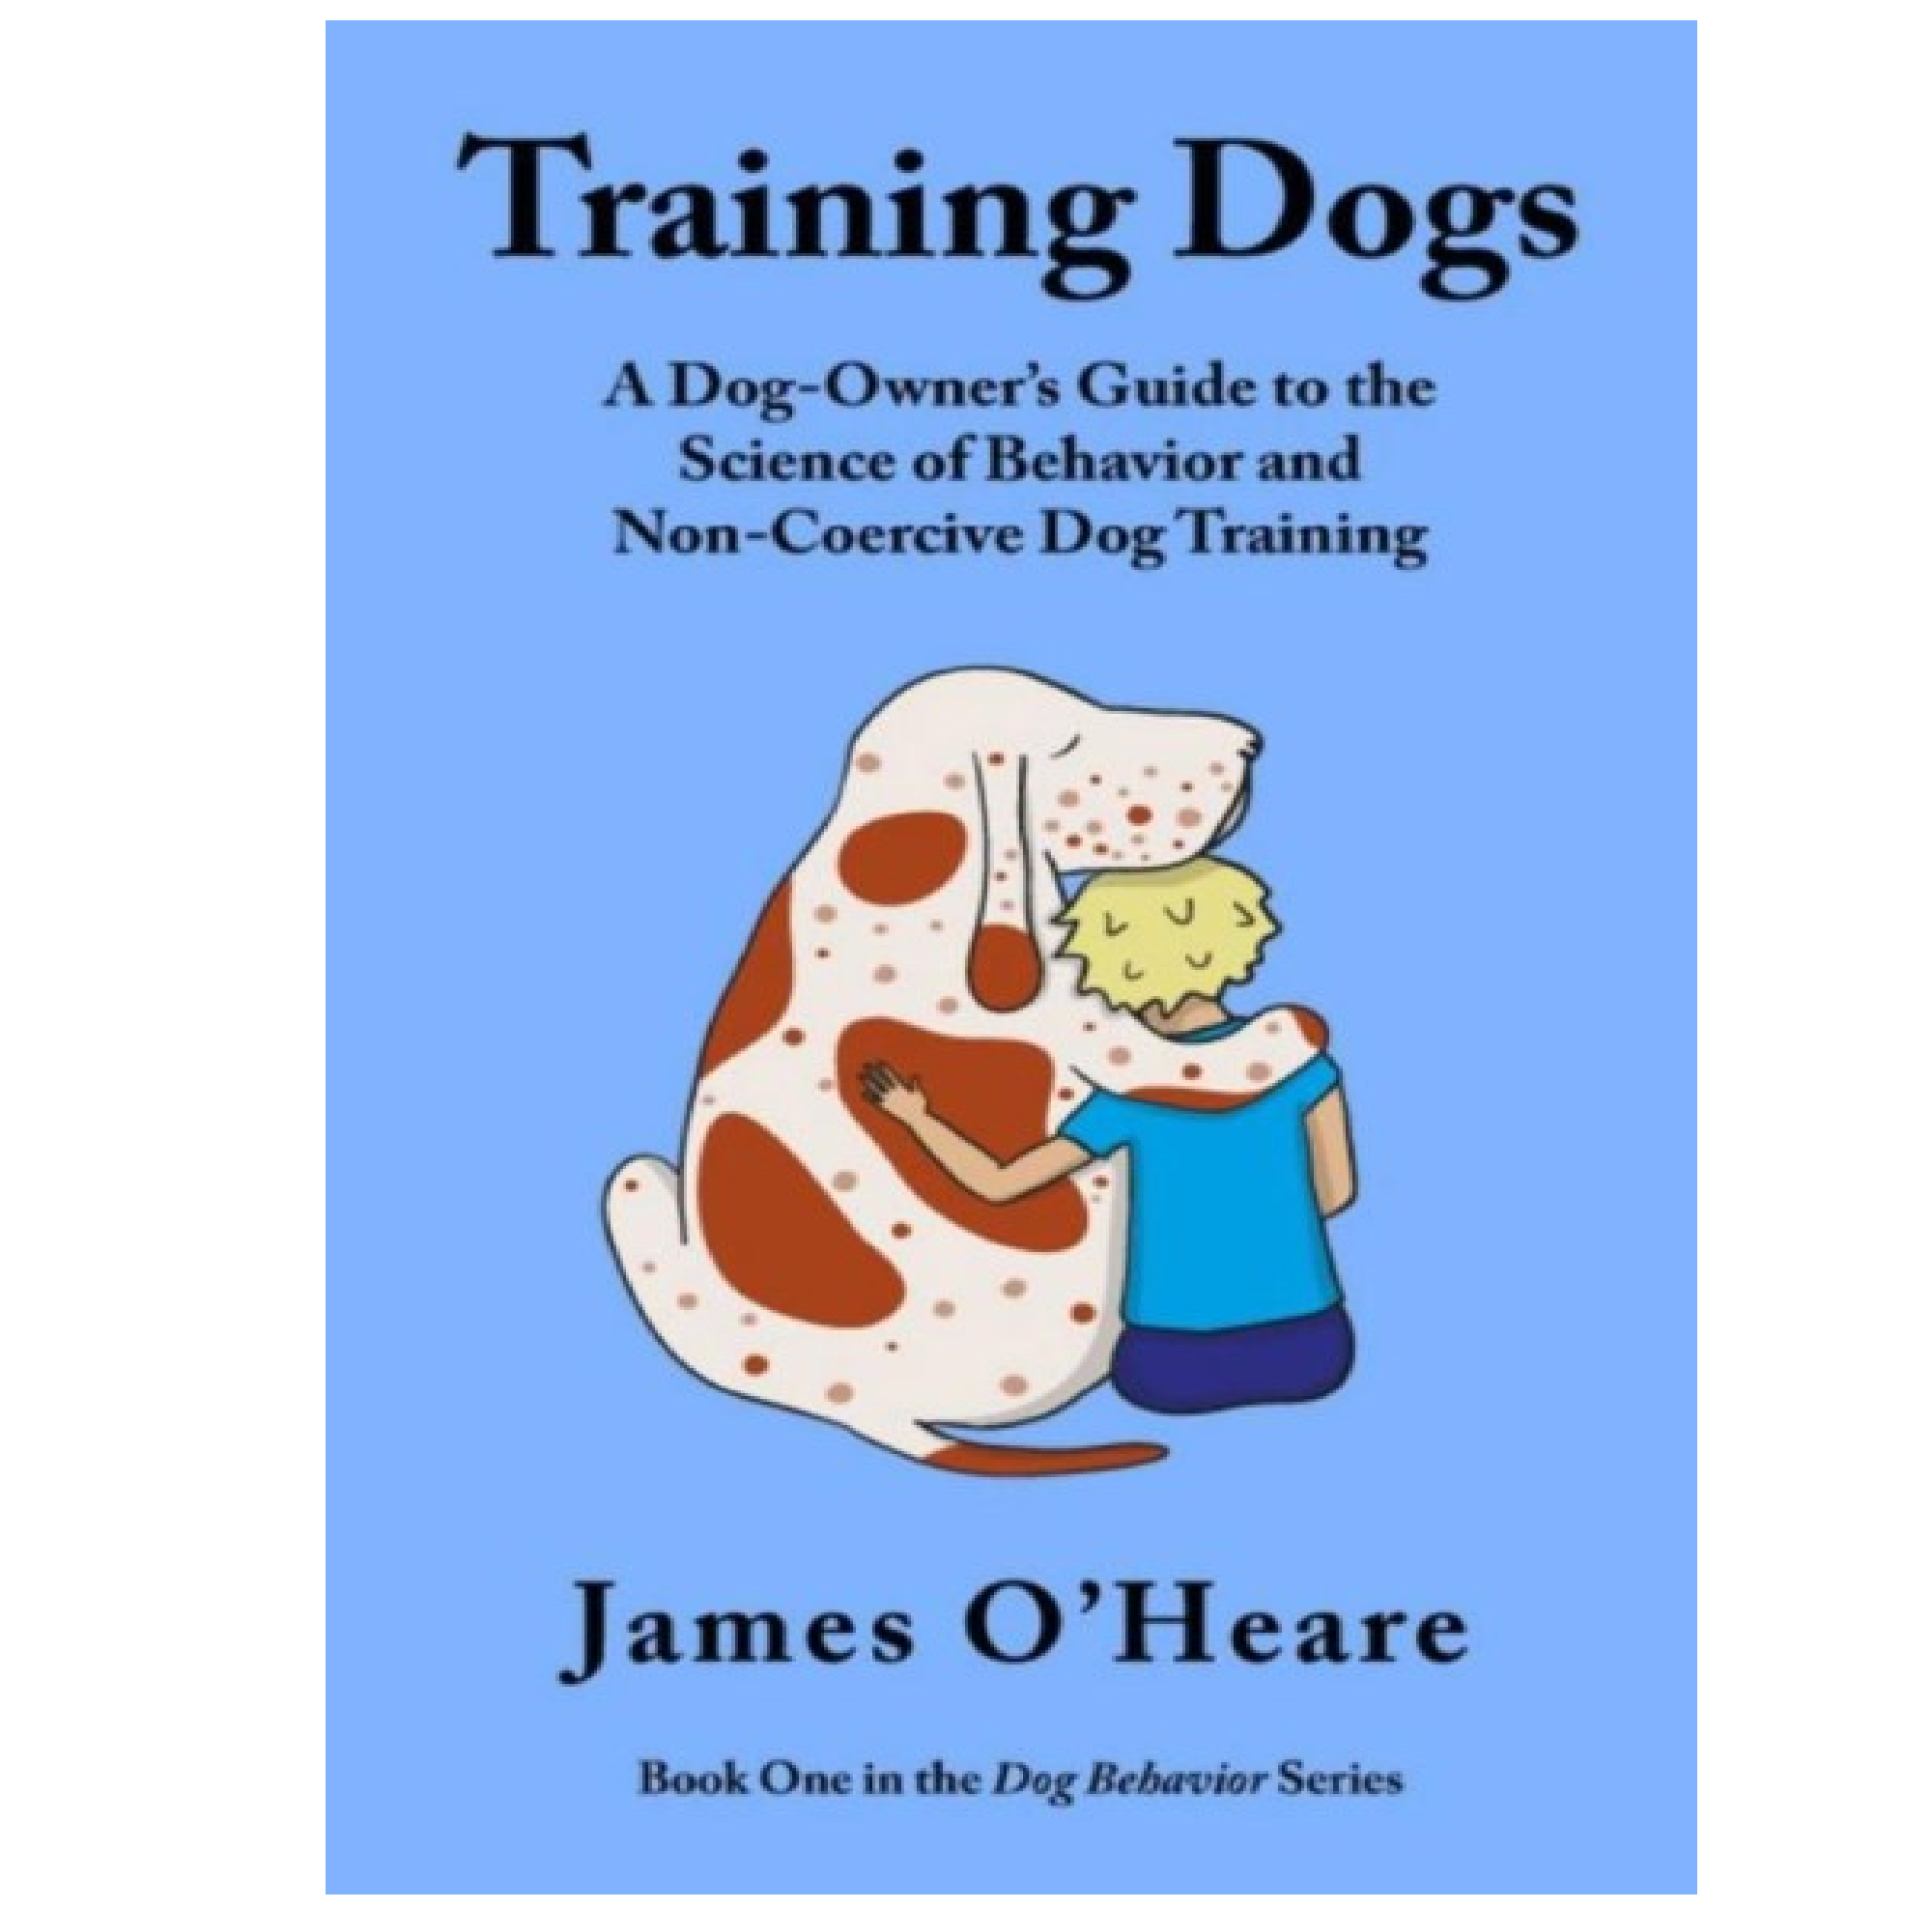 Training Dogs - A Dog Owner's Guide To The Science Of Behavior and Non-Coercive Dog Training